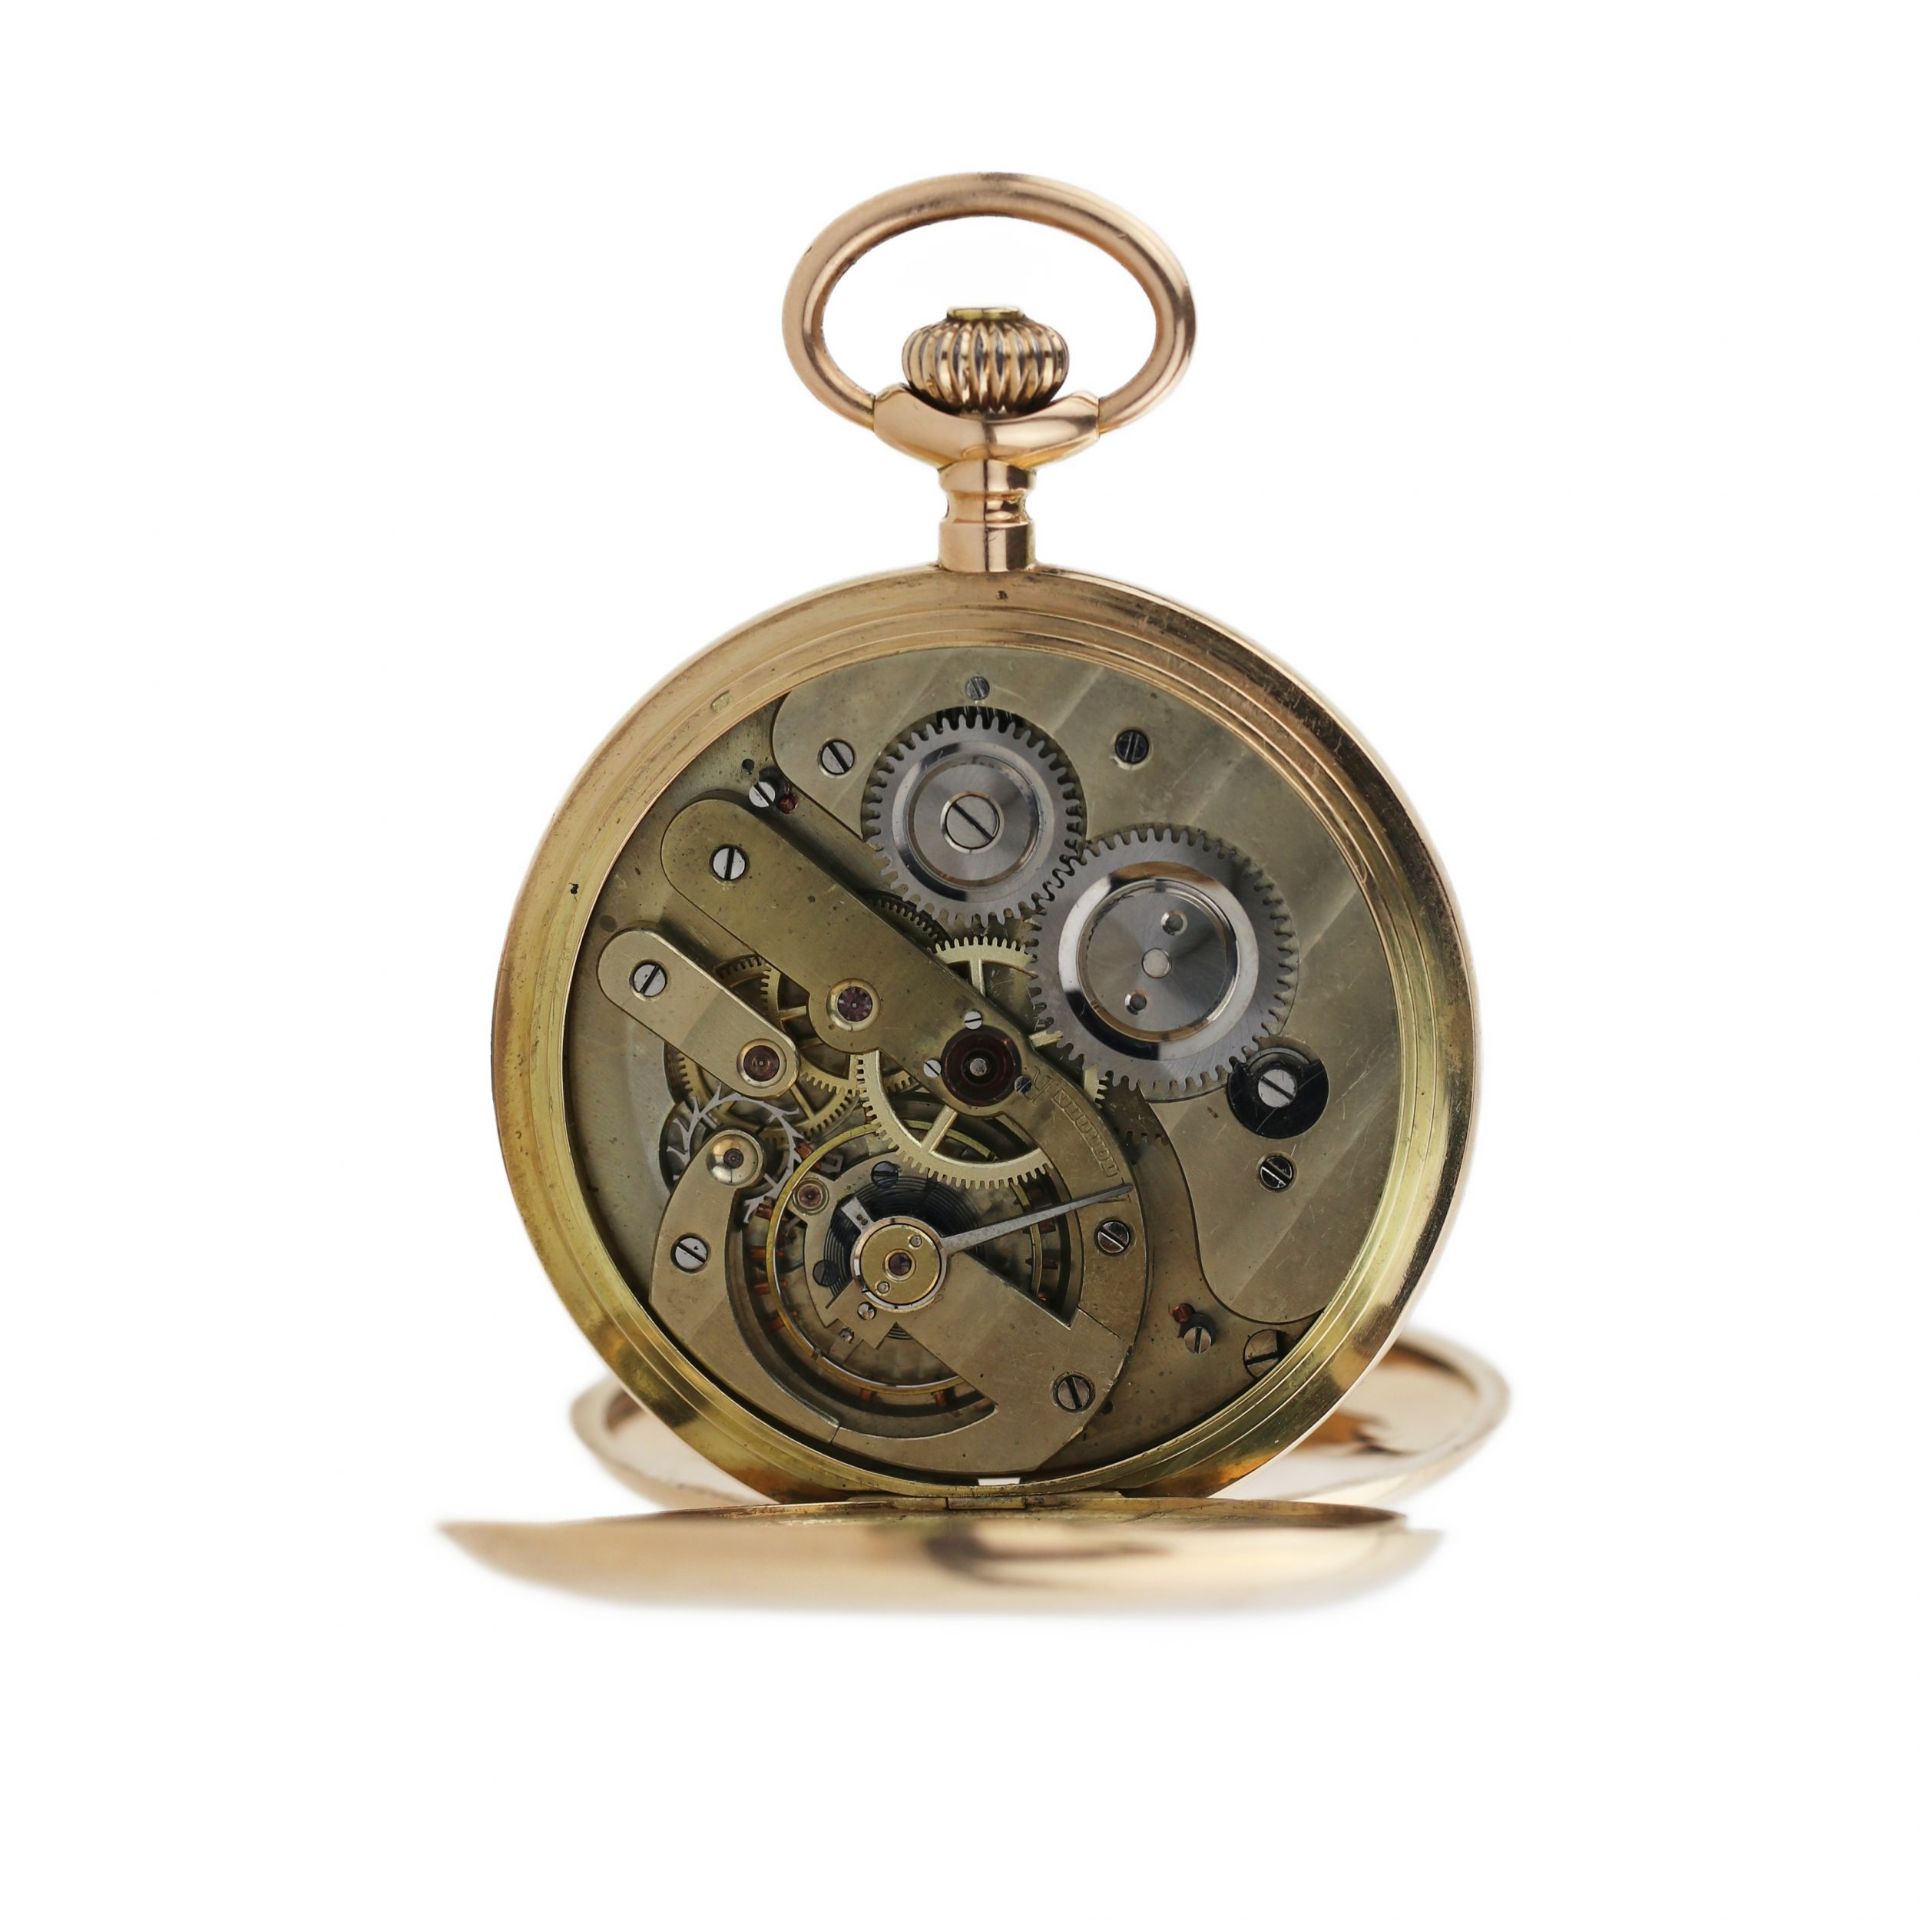 Russian, gold, pocket watch of the pre-revolutionary company F. Winter. - Image 7 of 10